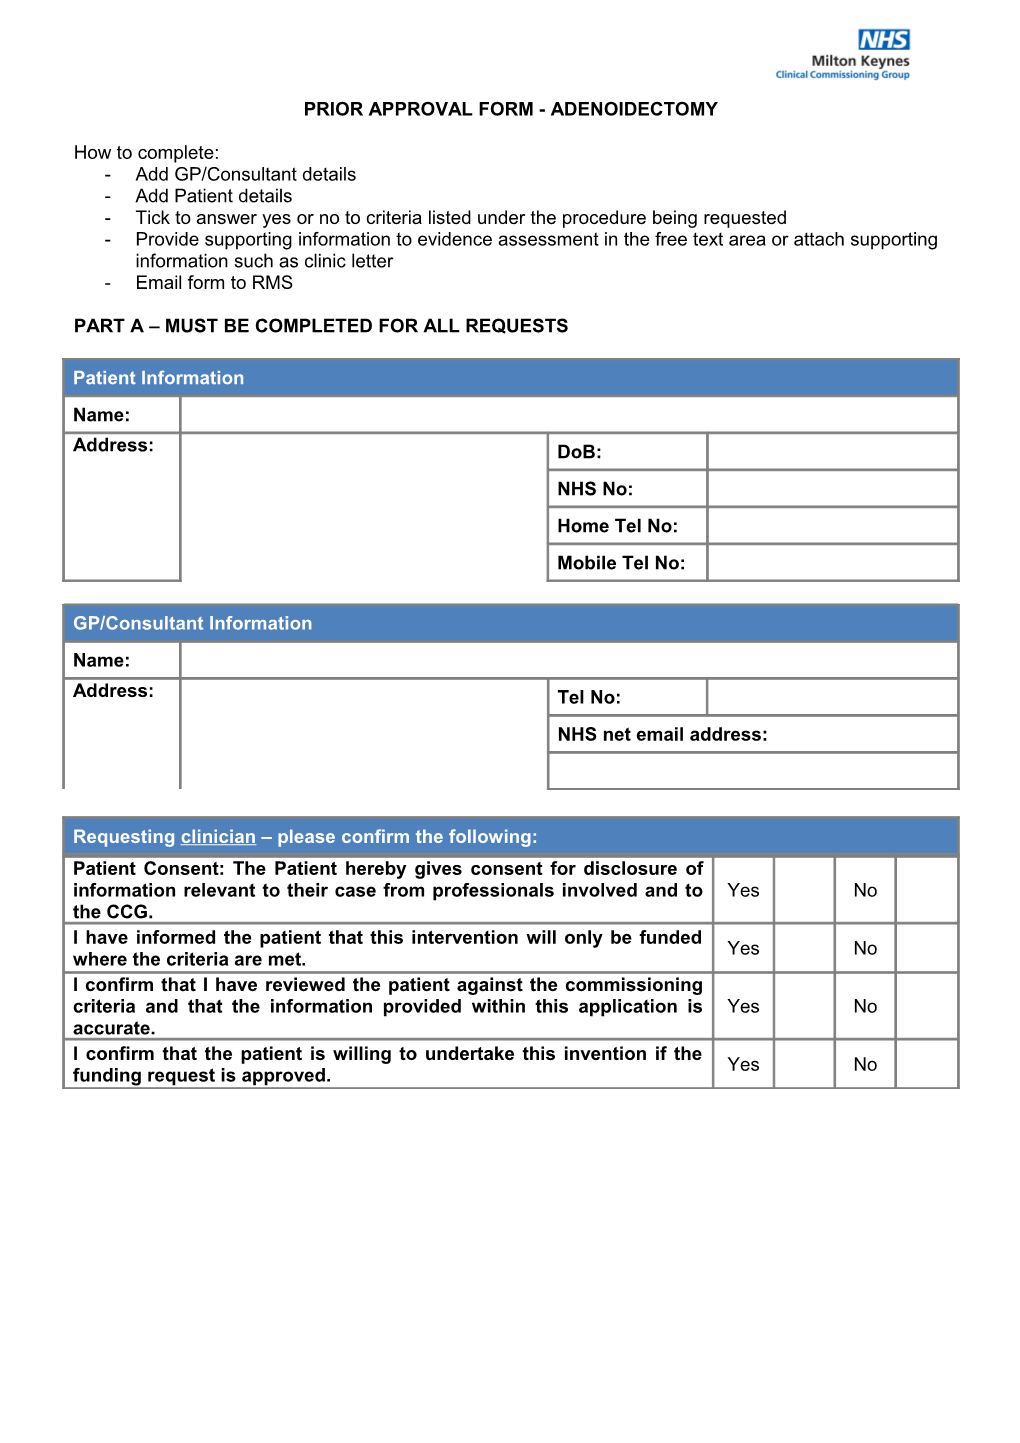 Prior Approval Form - Adenoidectomy